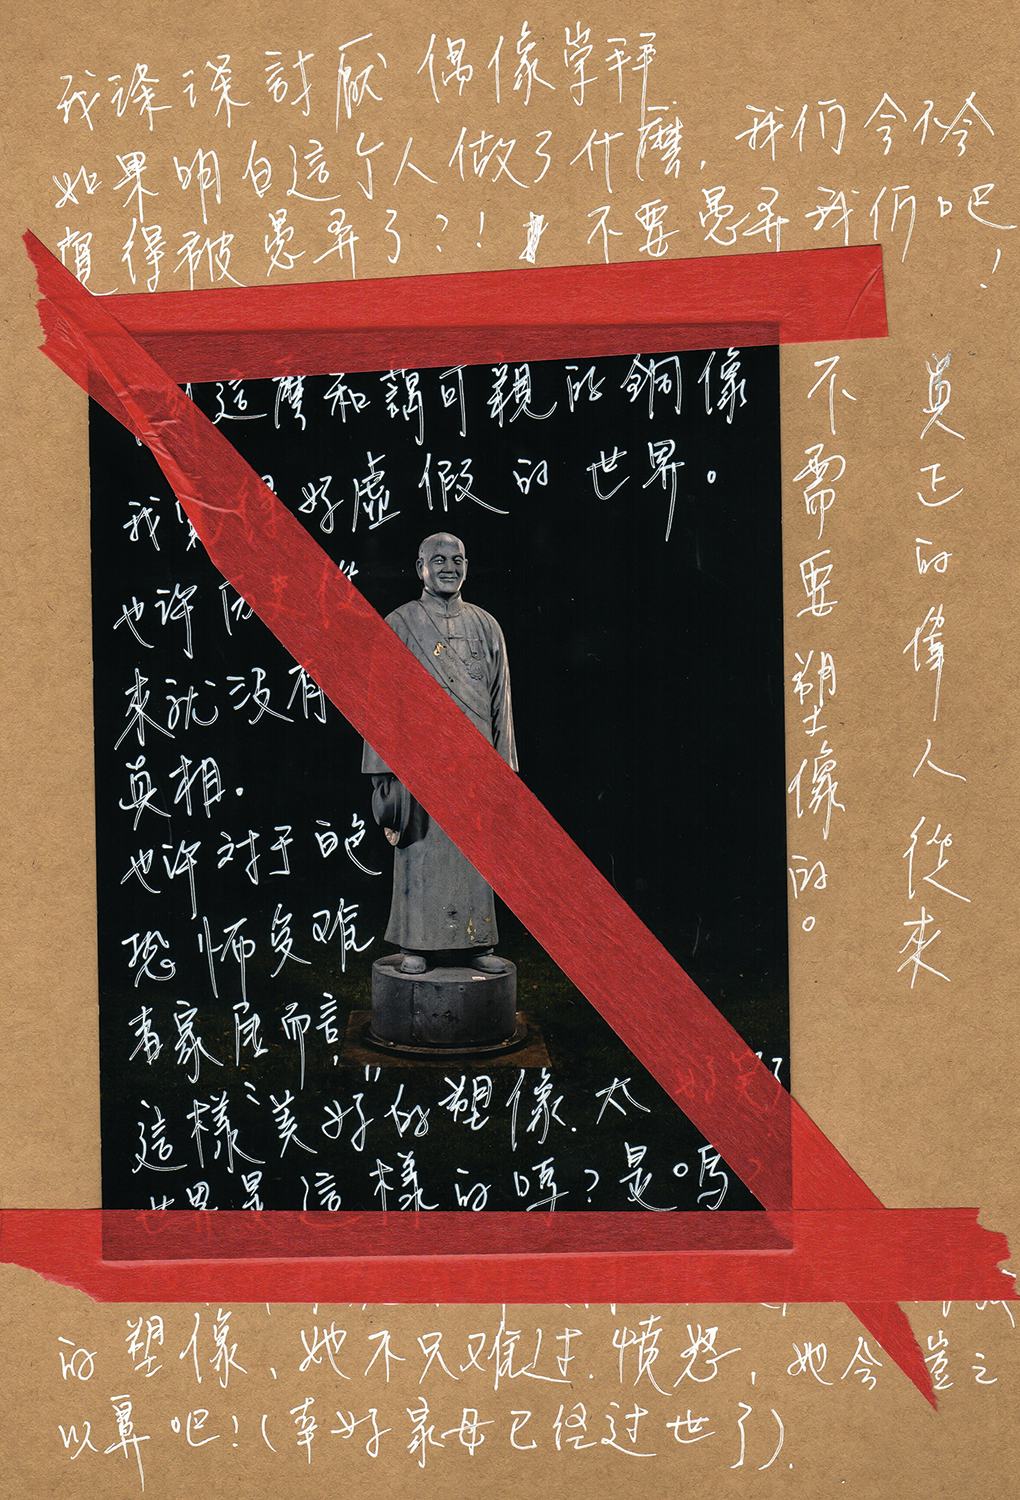 From the series Last Letters A Photographic Investigation of Taiwan White Terror C Billy H.C. Kwok courtesy of the artist